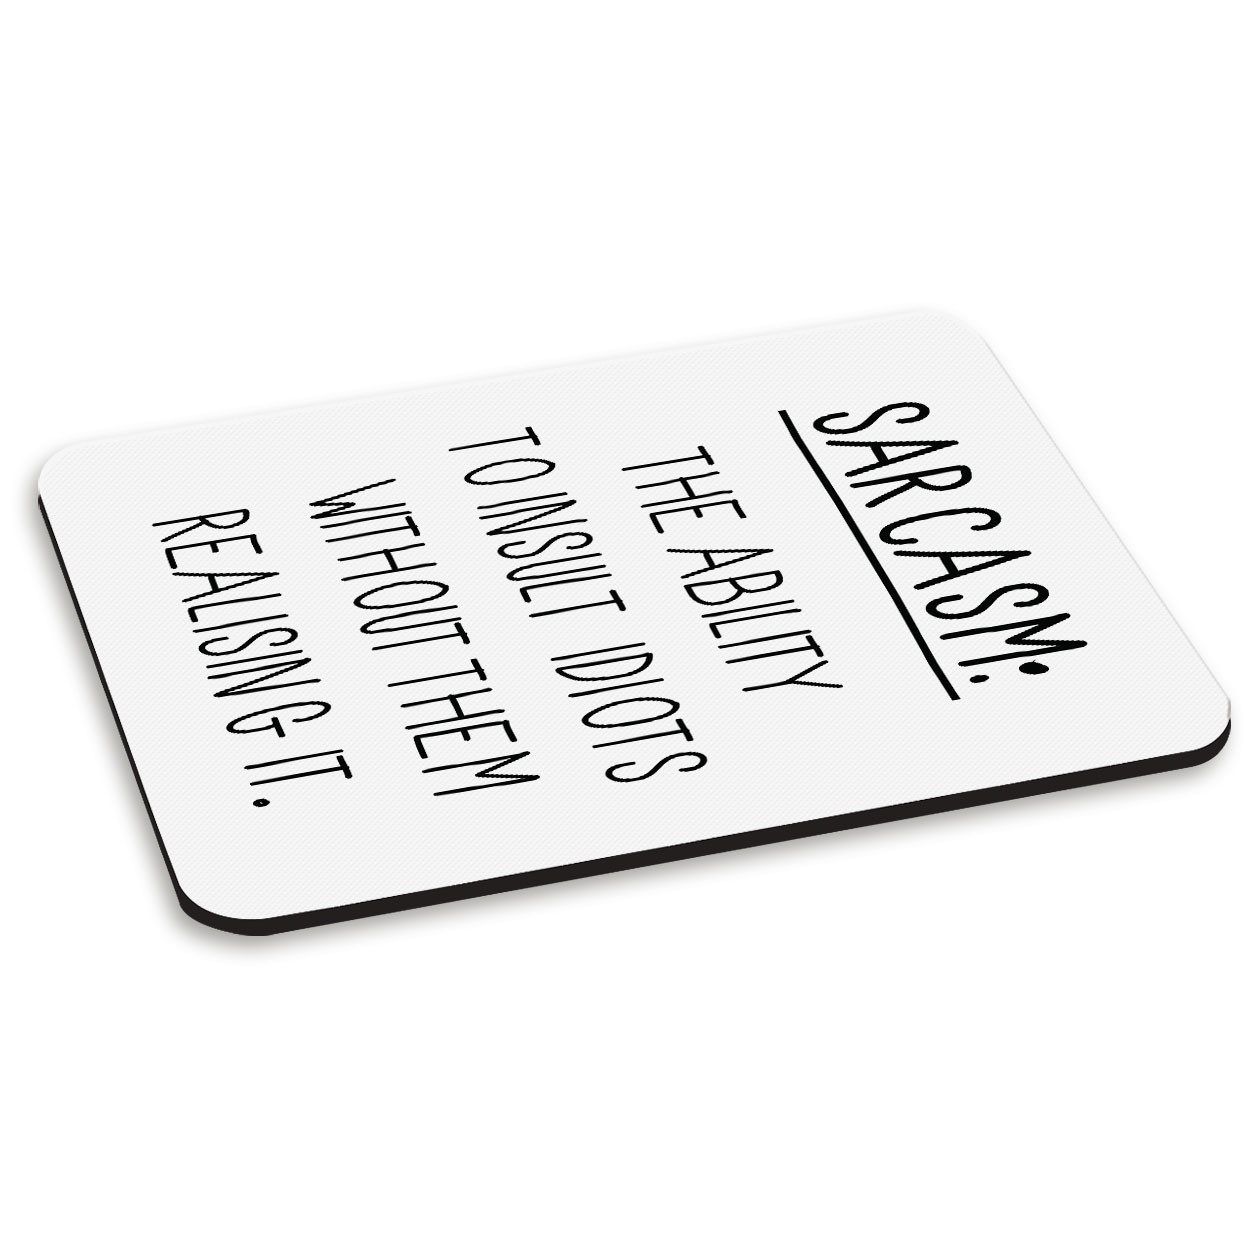 Sarcasm The Ability To Insult Idiots PC Computer Mouse Mat Pad